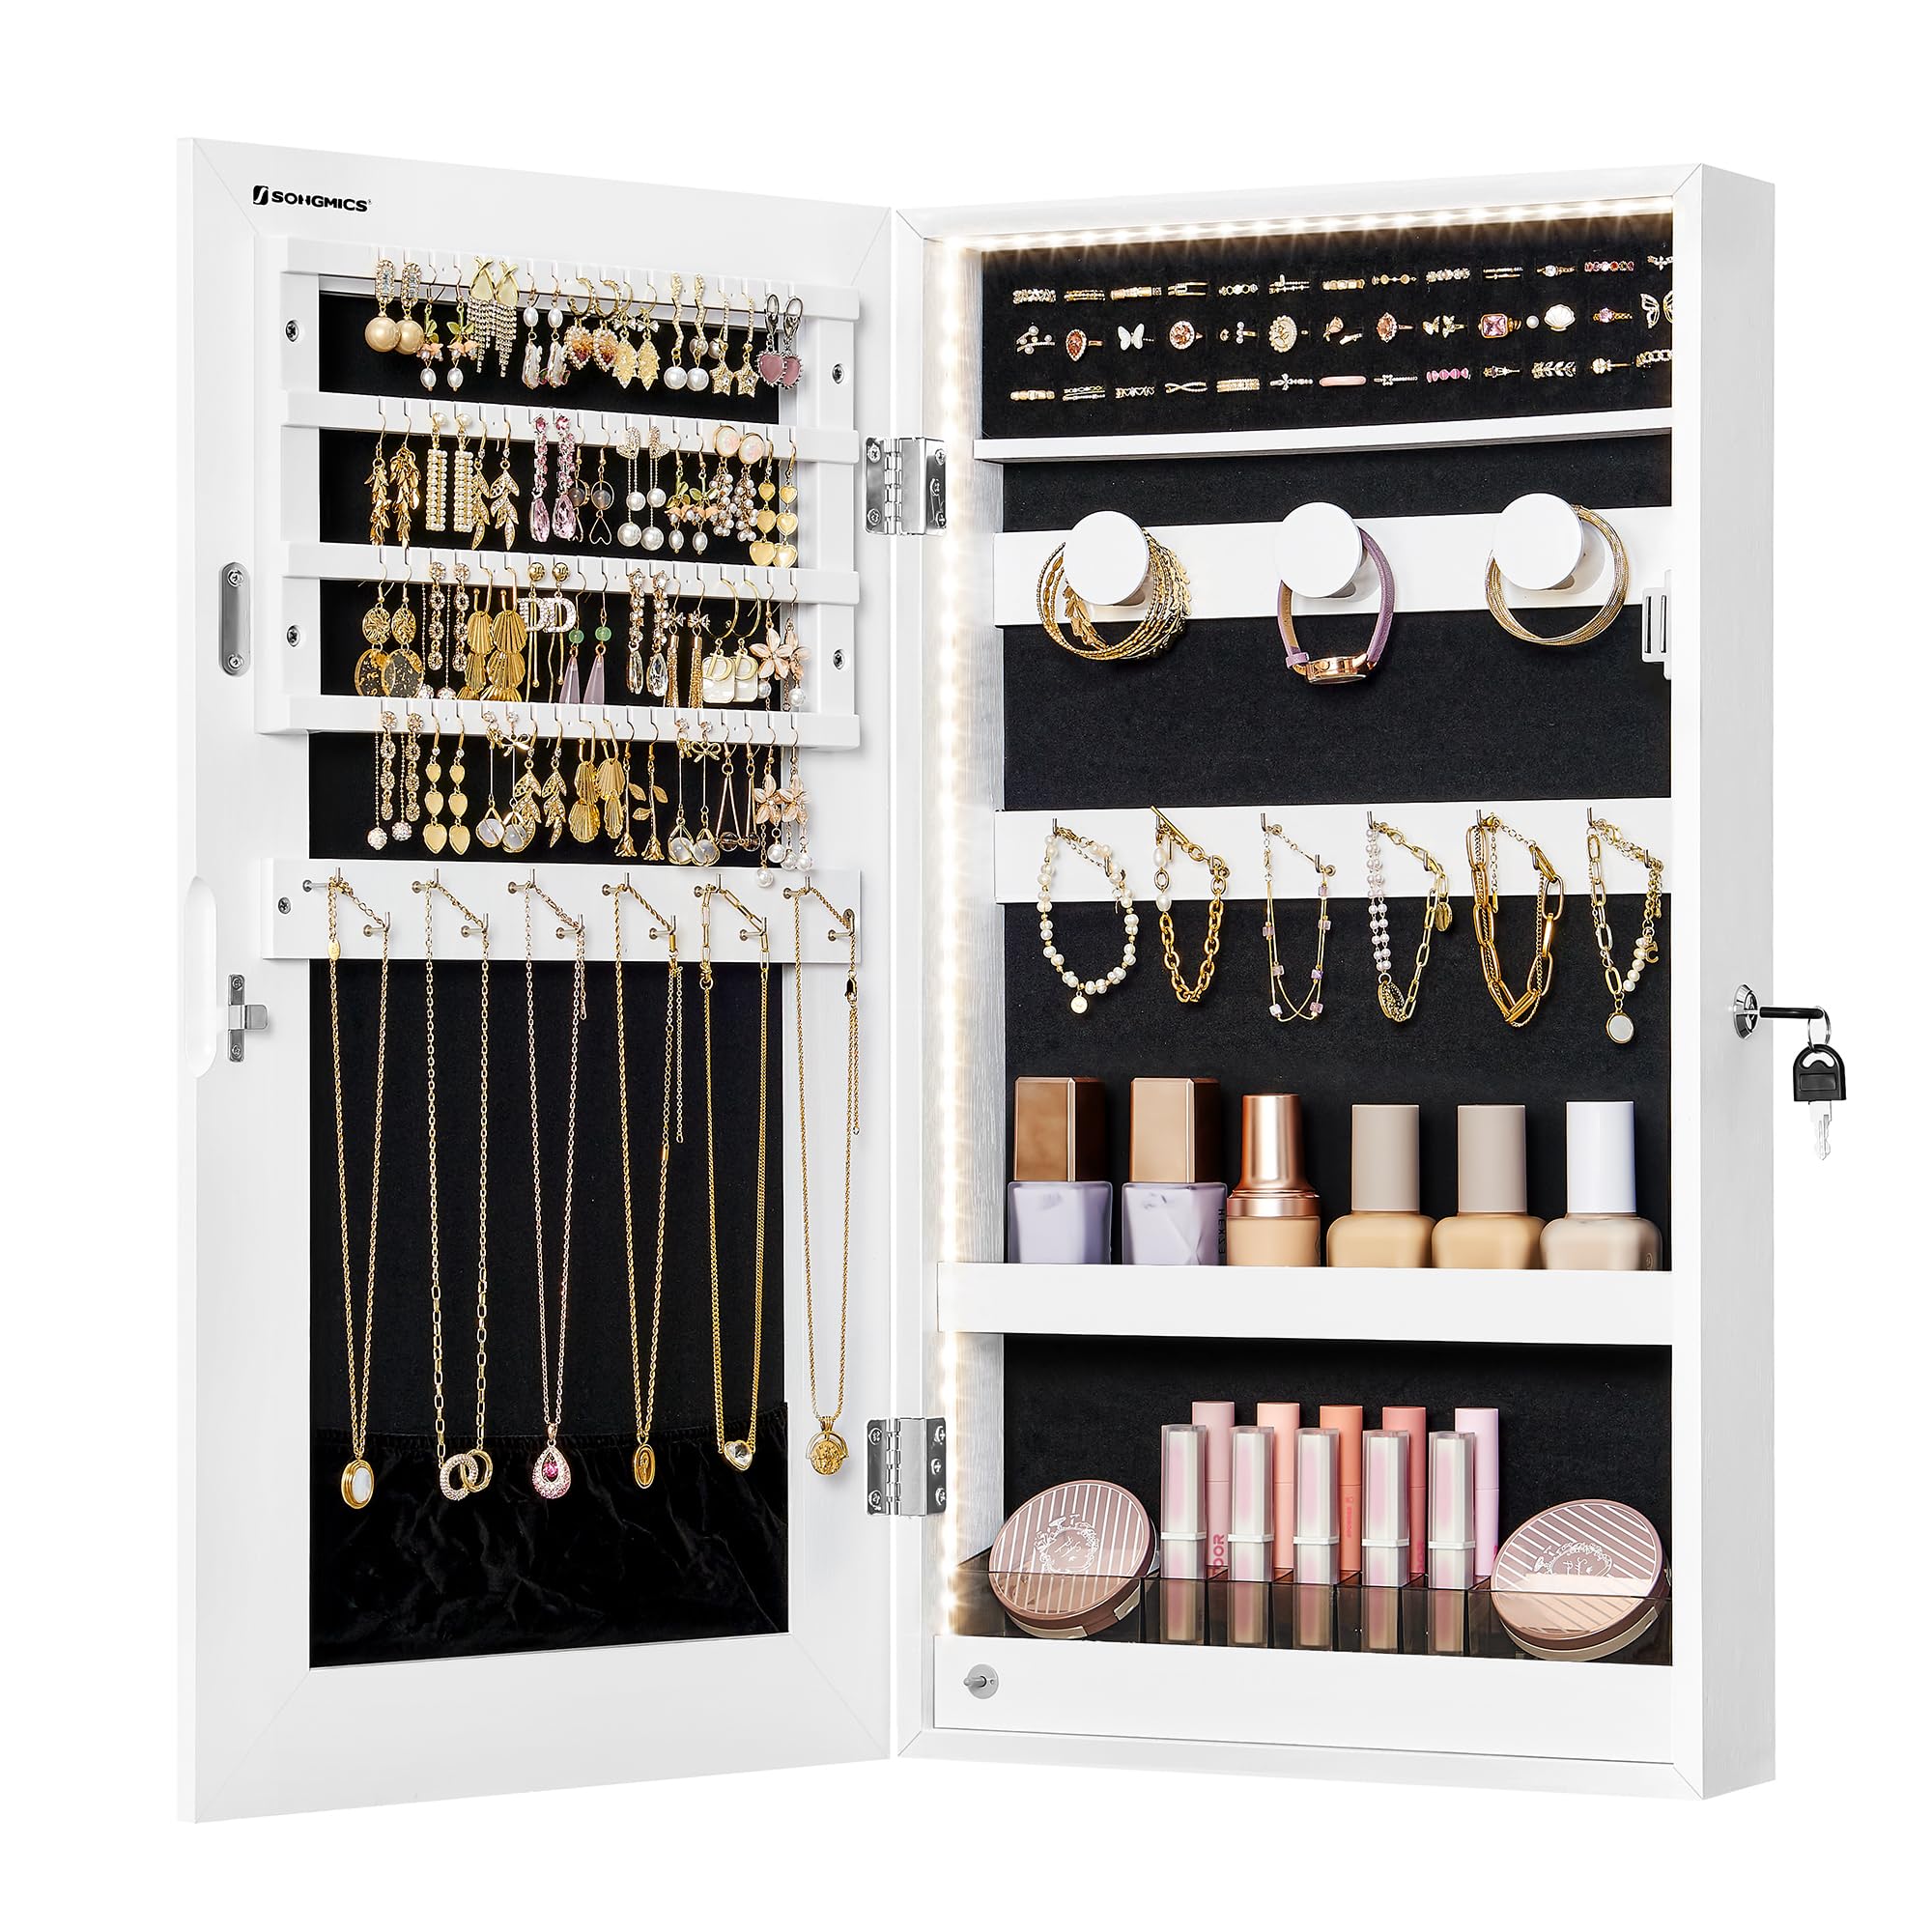 SONGMICS Mirror Jewelry Cabinet Armoire with Built-in LED Lights, Wall or Door Mounted Jewelry Storage Organizer, 3.8 x 14.6 x 26.4 Inches Hanging Mirror Cabinet, Gift Idea, White UJJC050W01